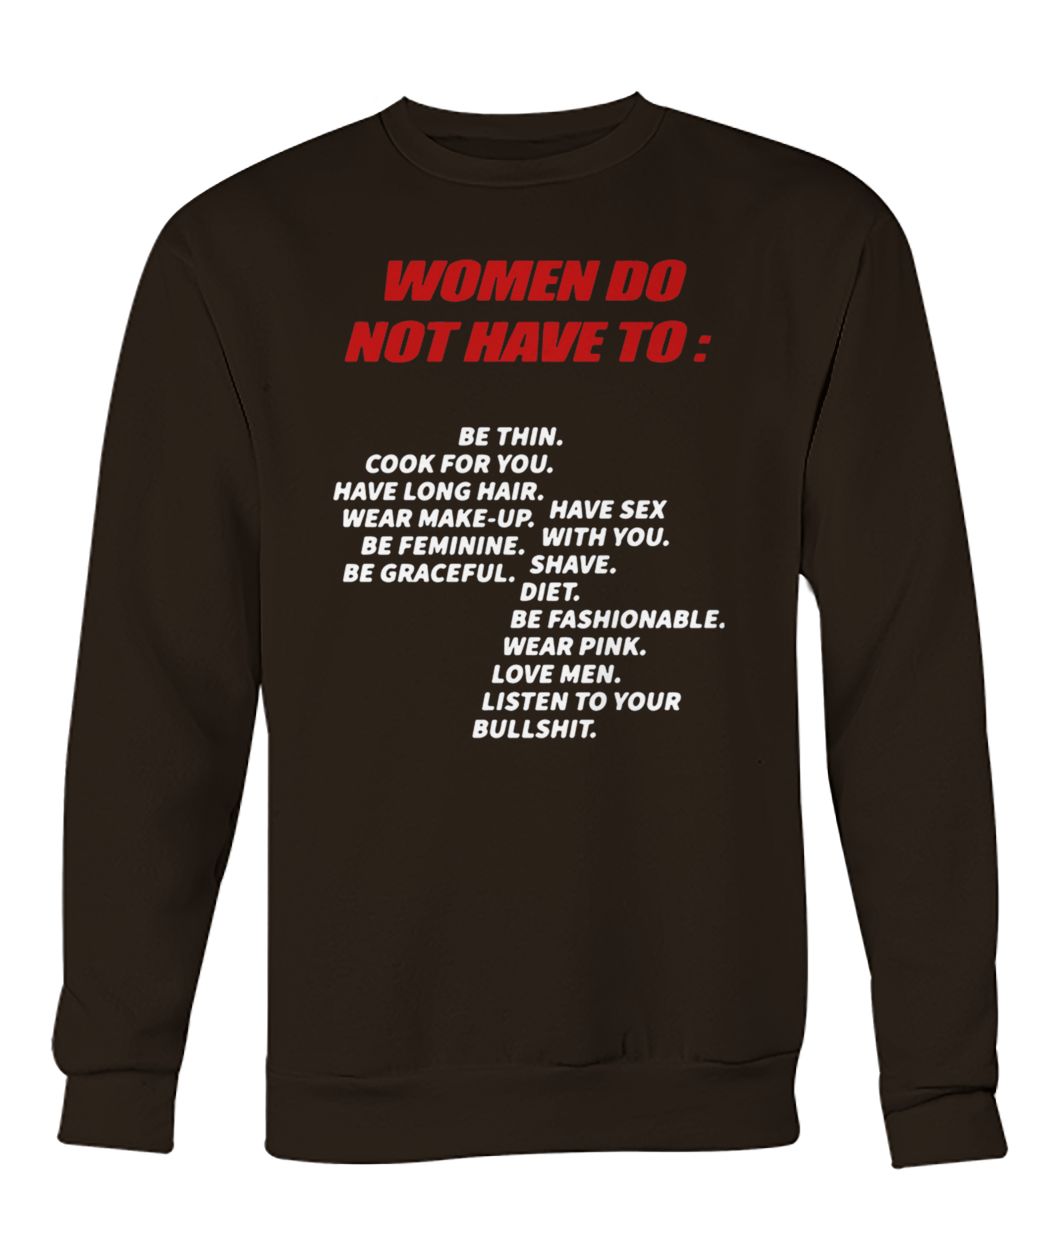 Women do not have to be thin cook for you listen to your bullshit crew neck sweatshirt